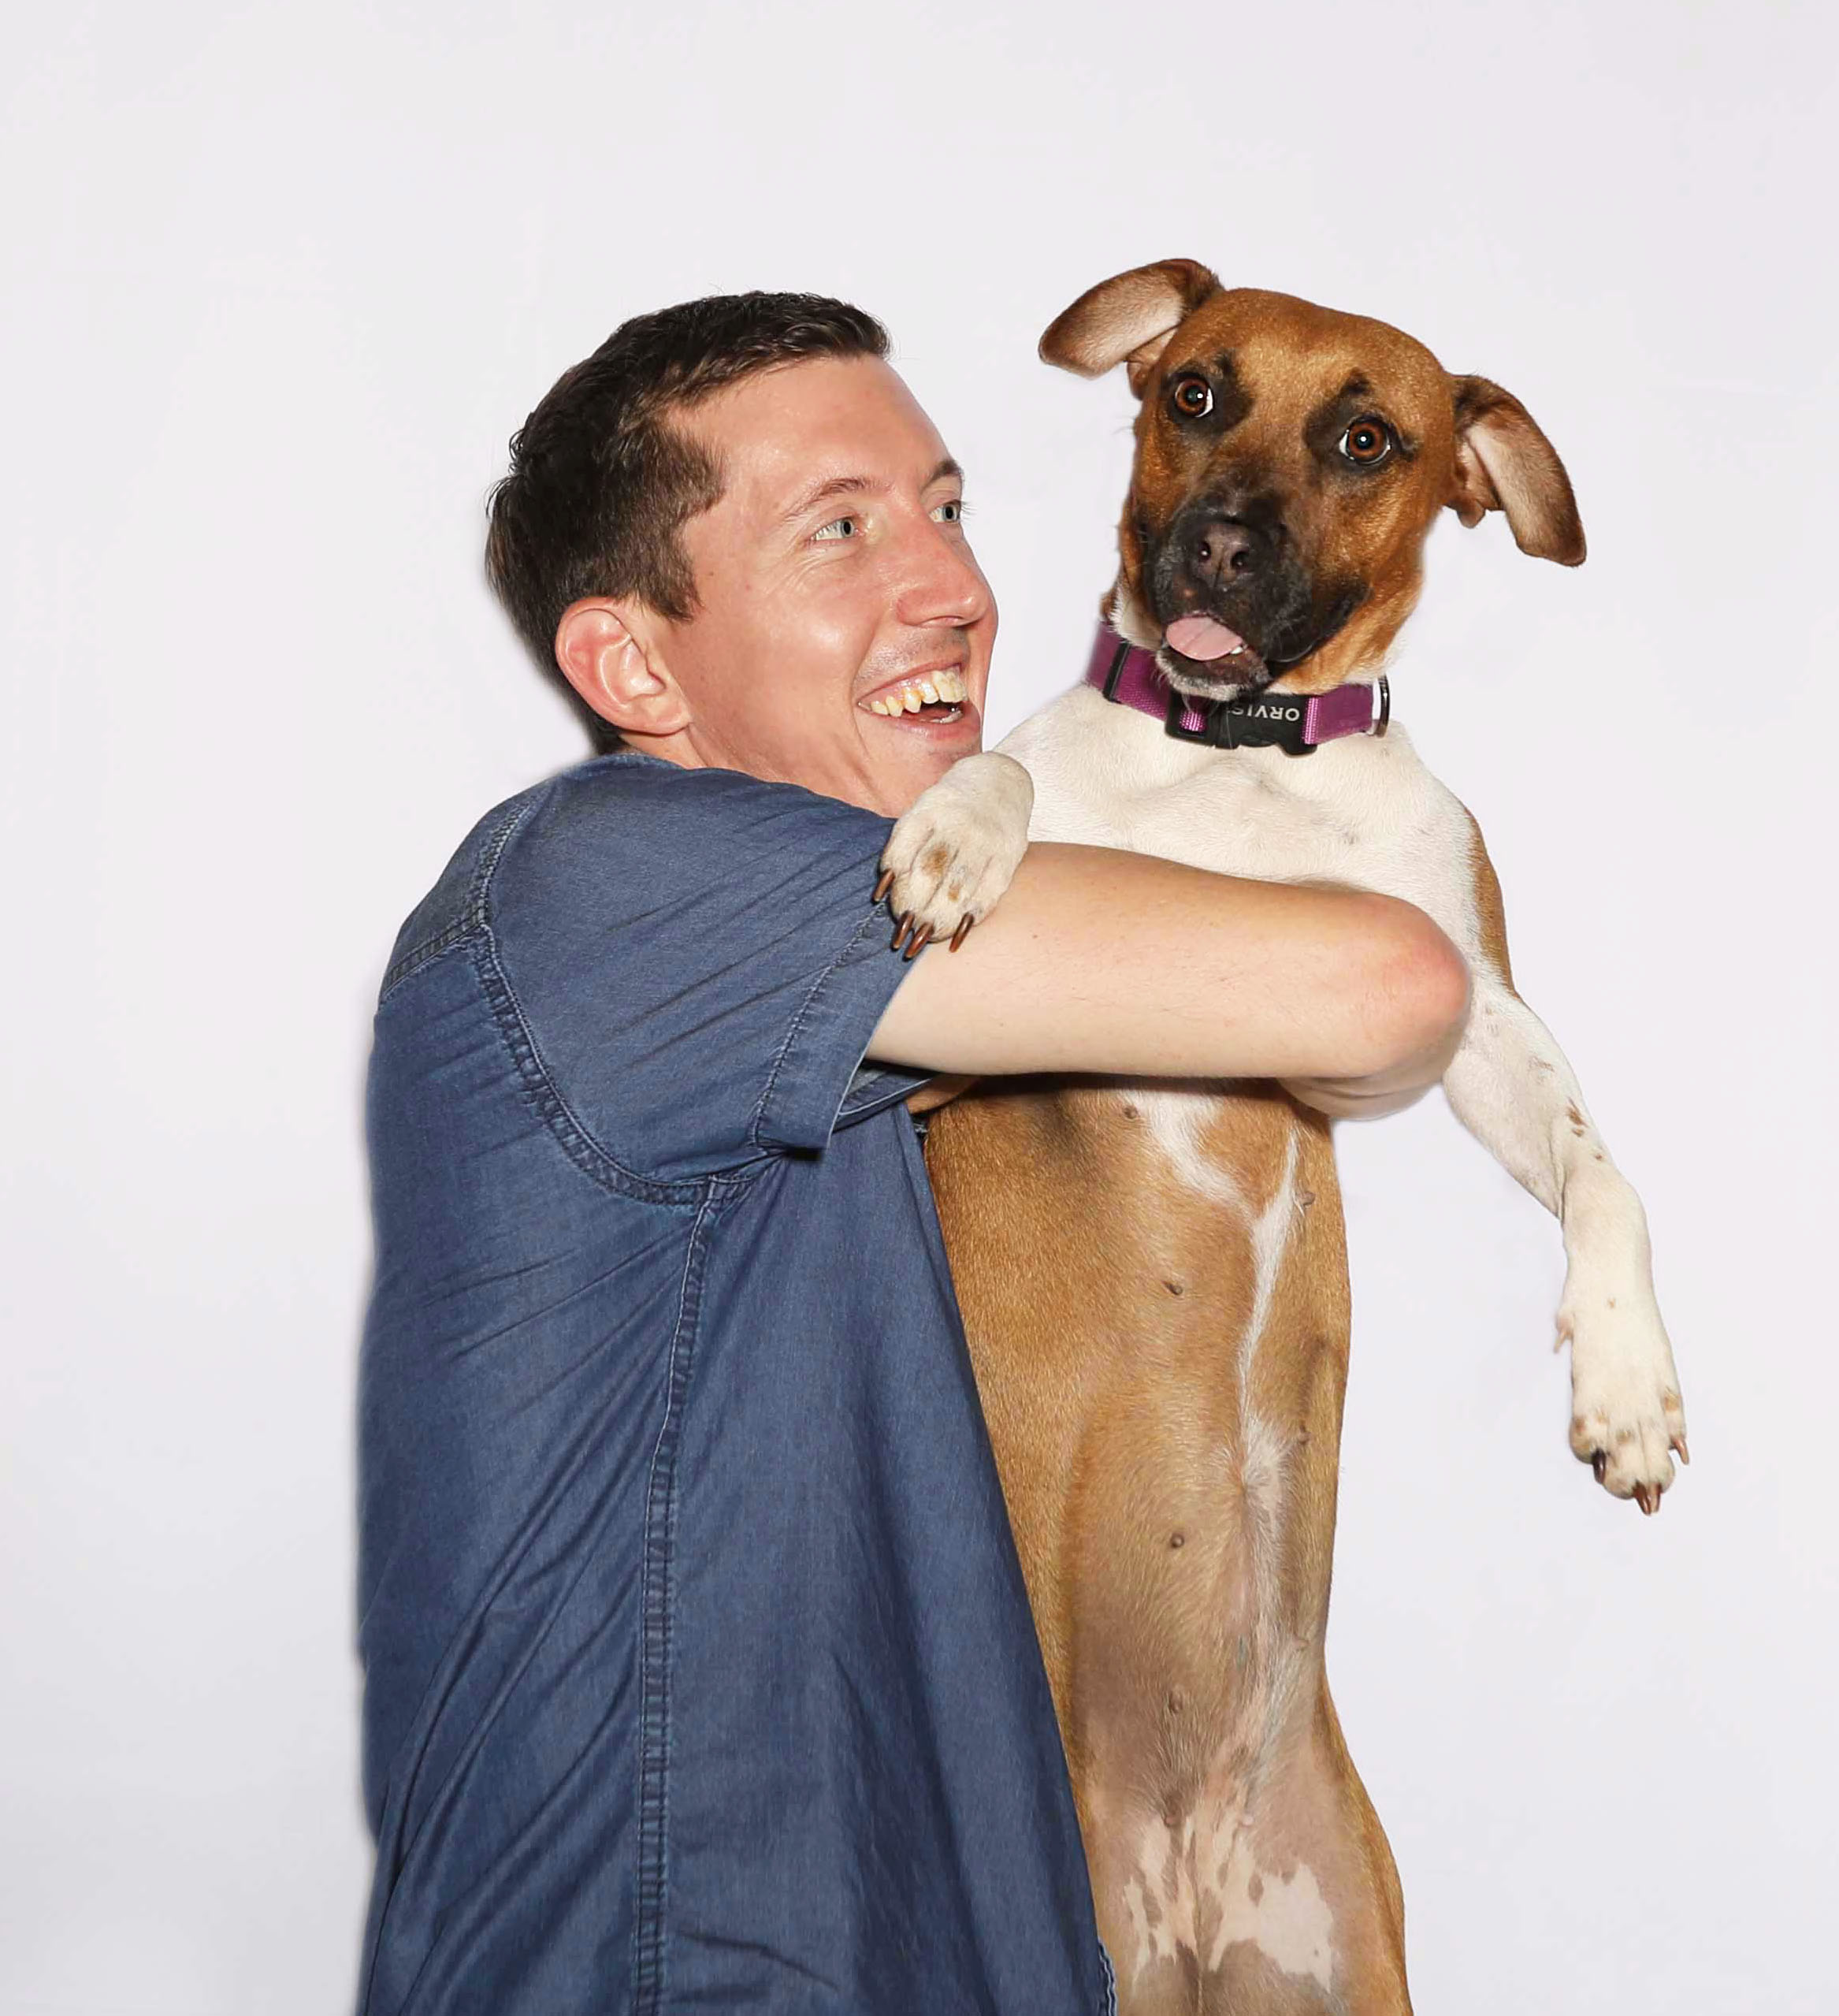 Nick started working at PetRelocation in 2019